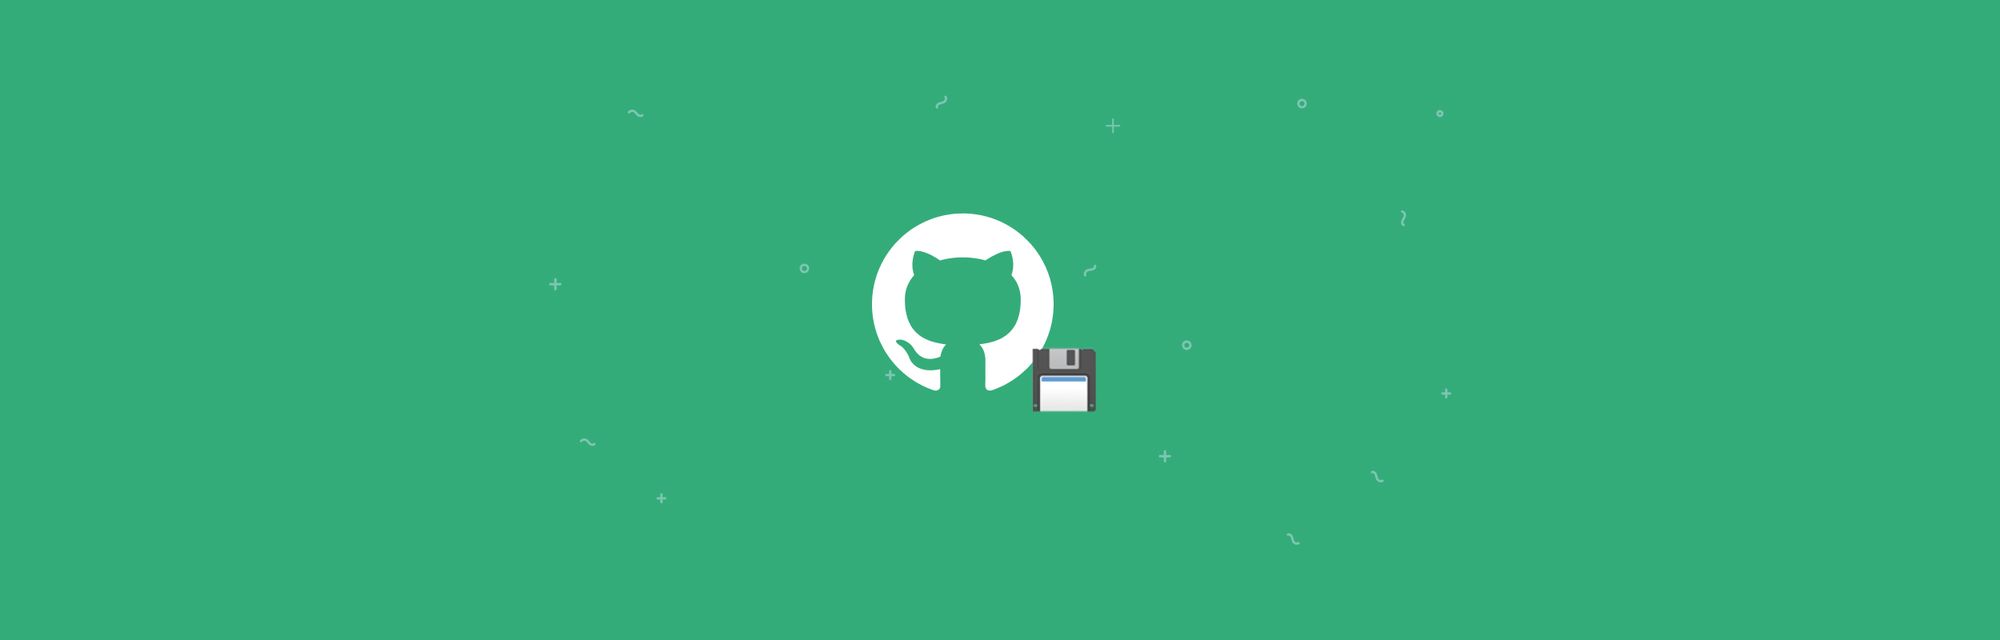 How to Backup all your GitHub repositories to your NAS